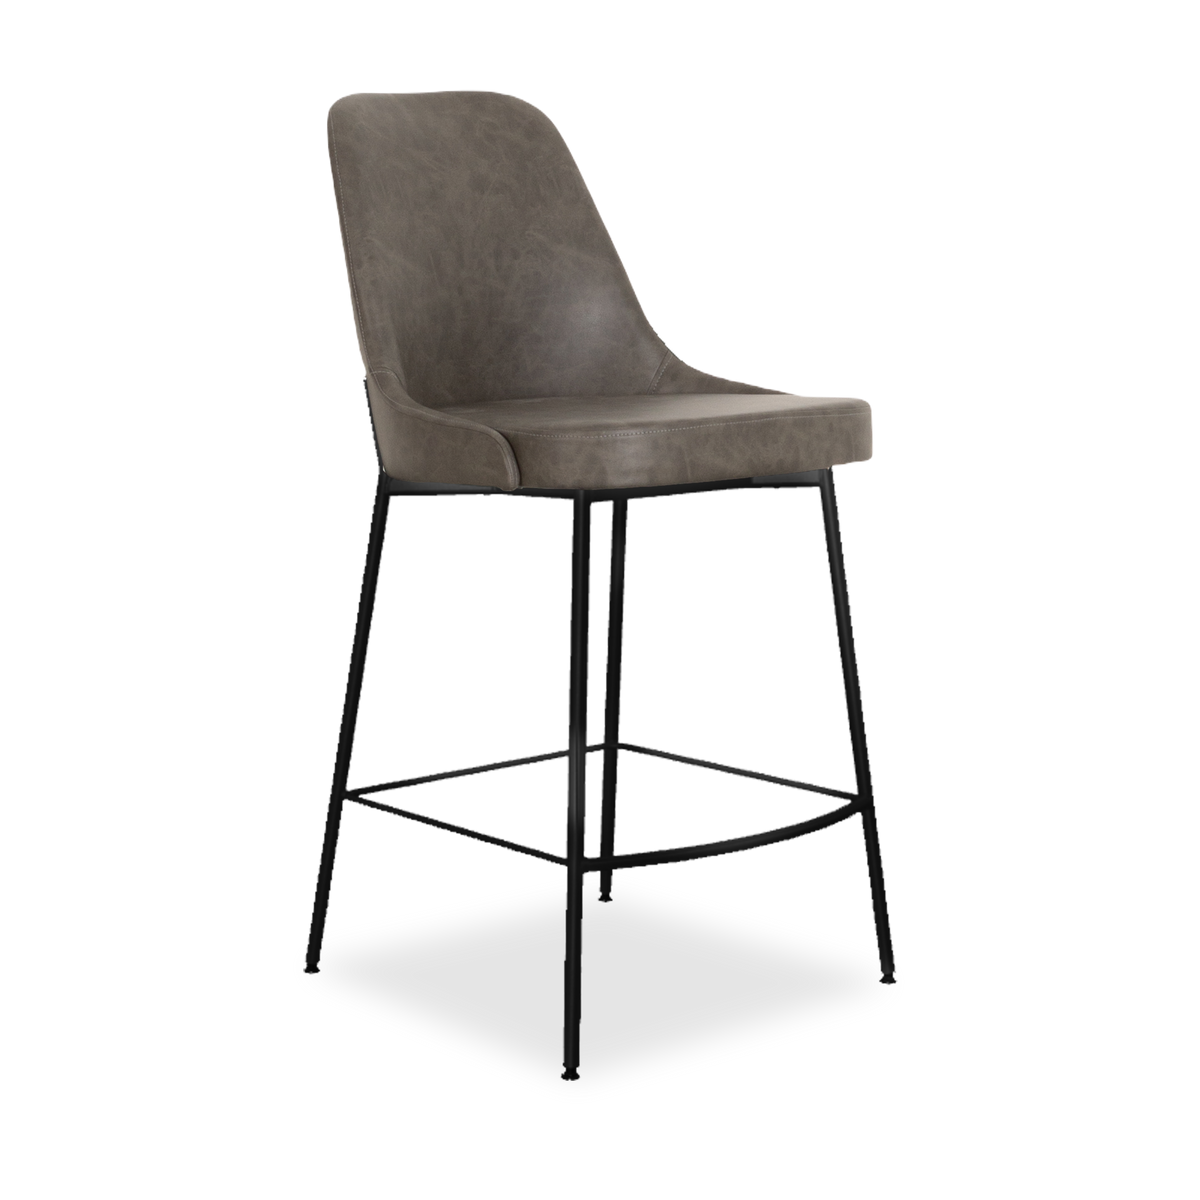 With its modern and curved silhouette, the Boyd Side Chair is a stylish addition to your dining space.